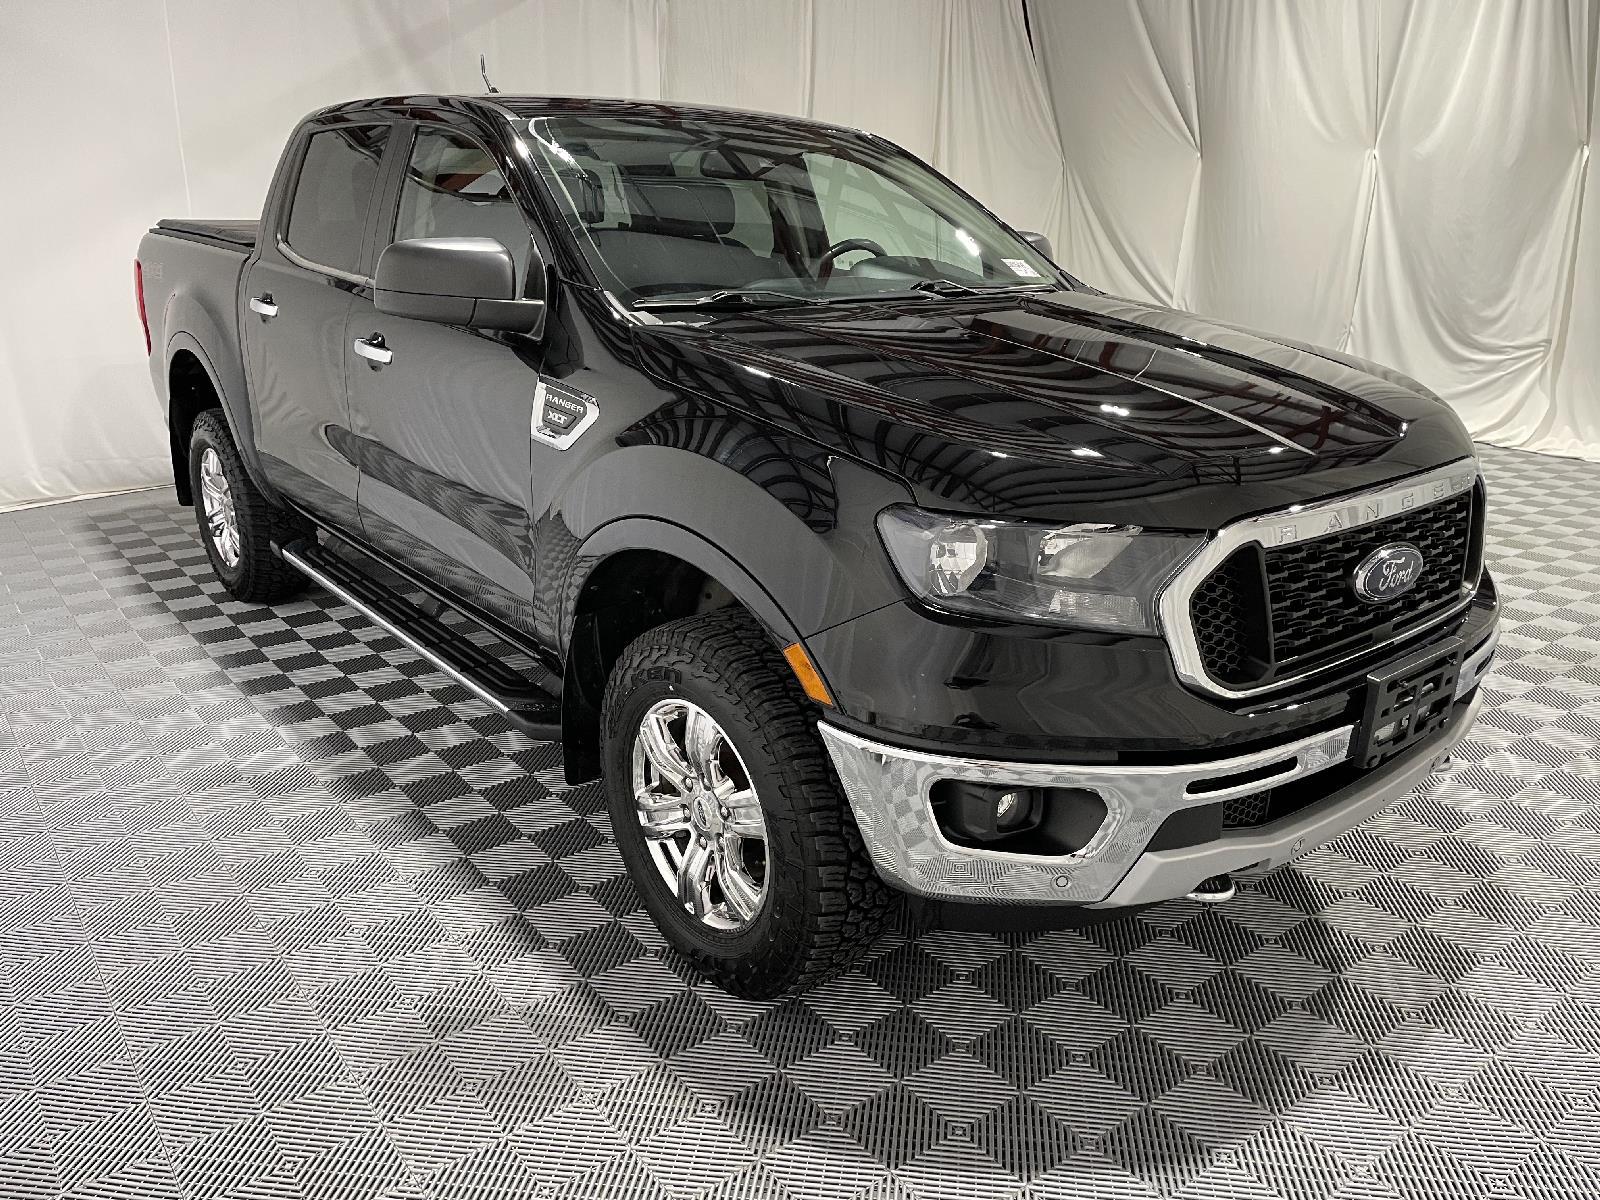 Used 2019 Ford Ranger XLT Crew Cab Truck for sale in St Joseph MO